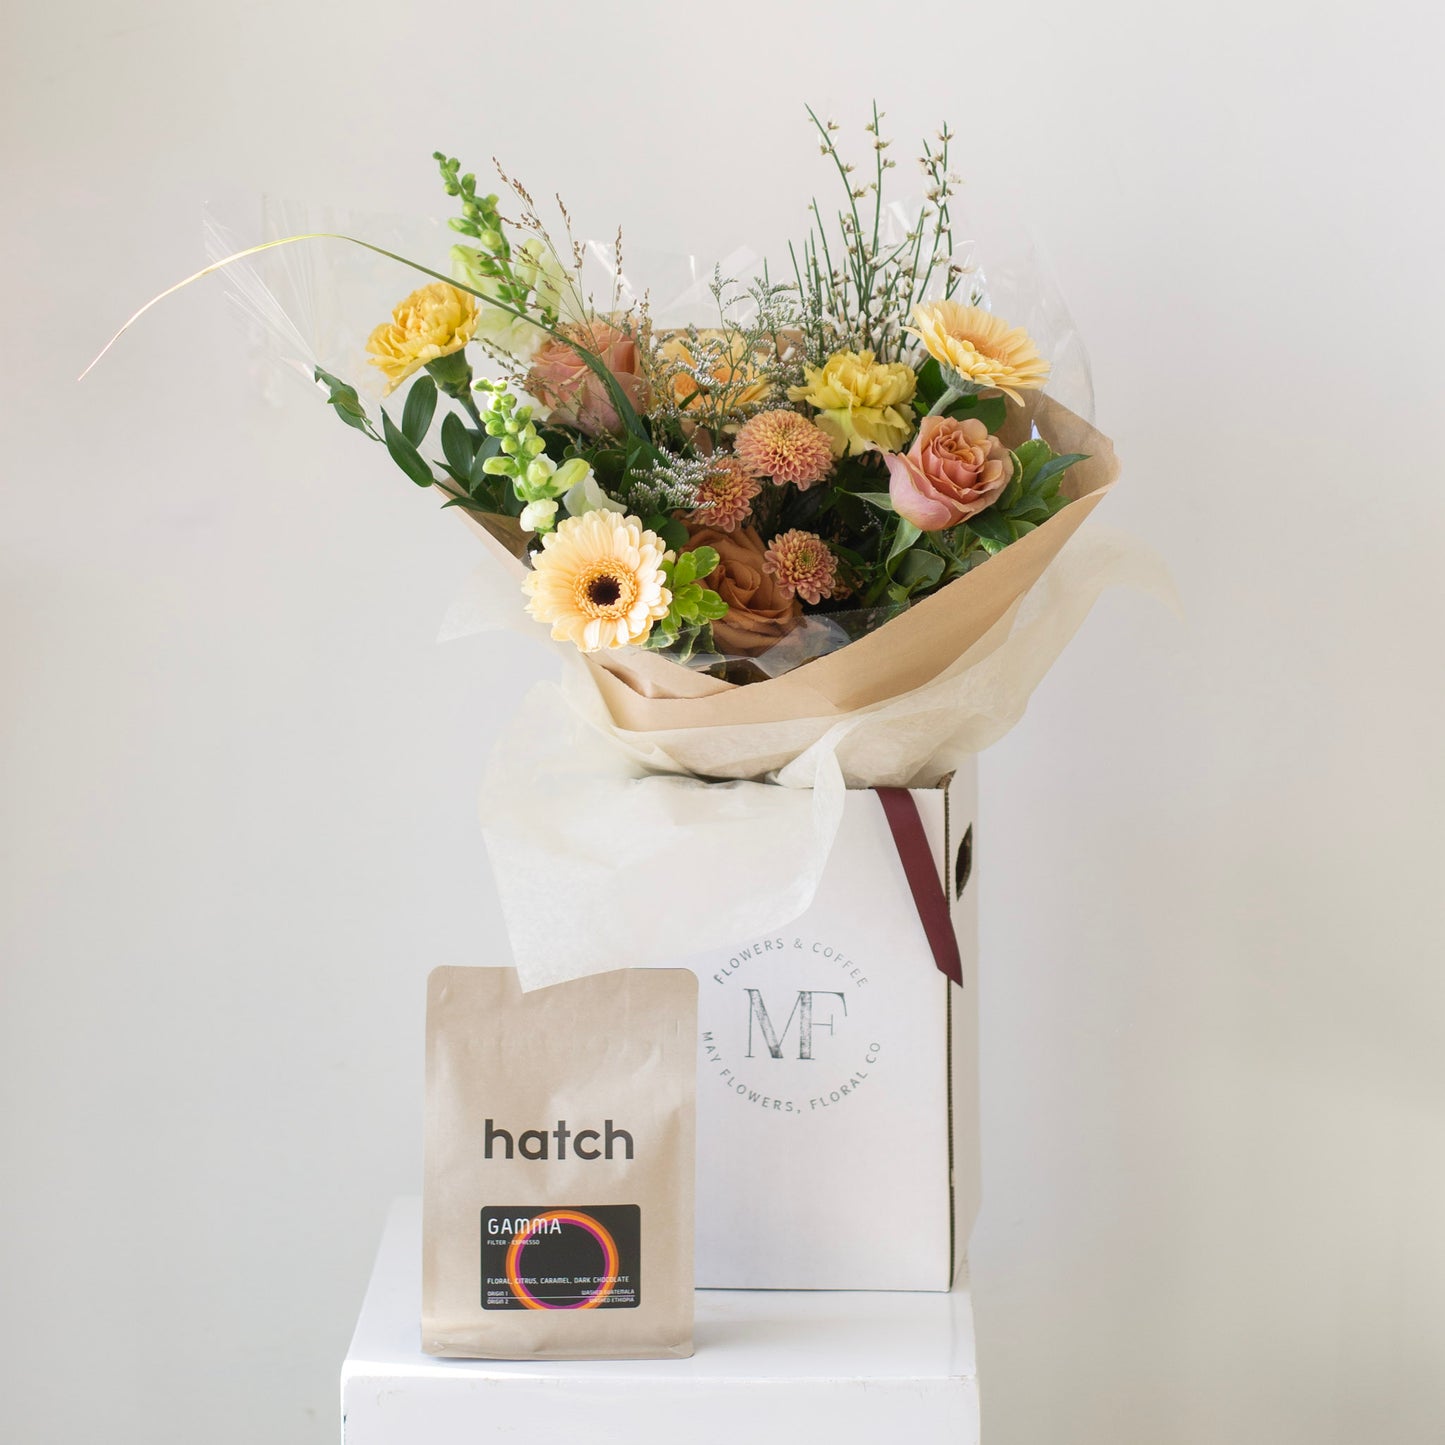 Hand-Tied Flowers + Hatch Whole Bean Coffee